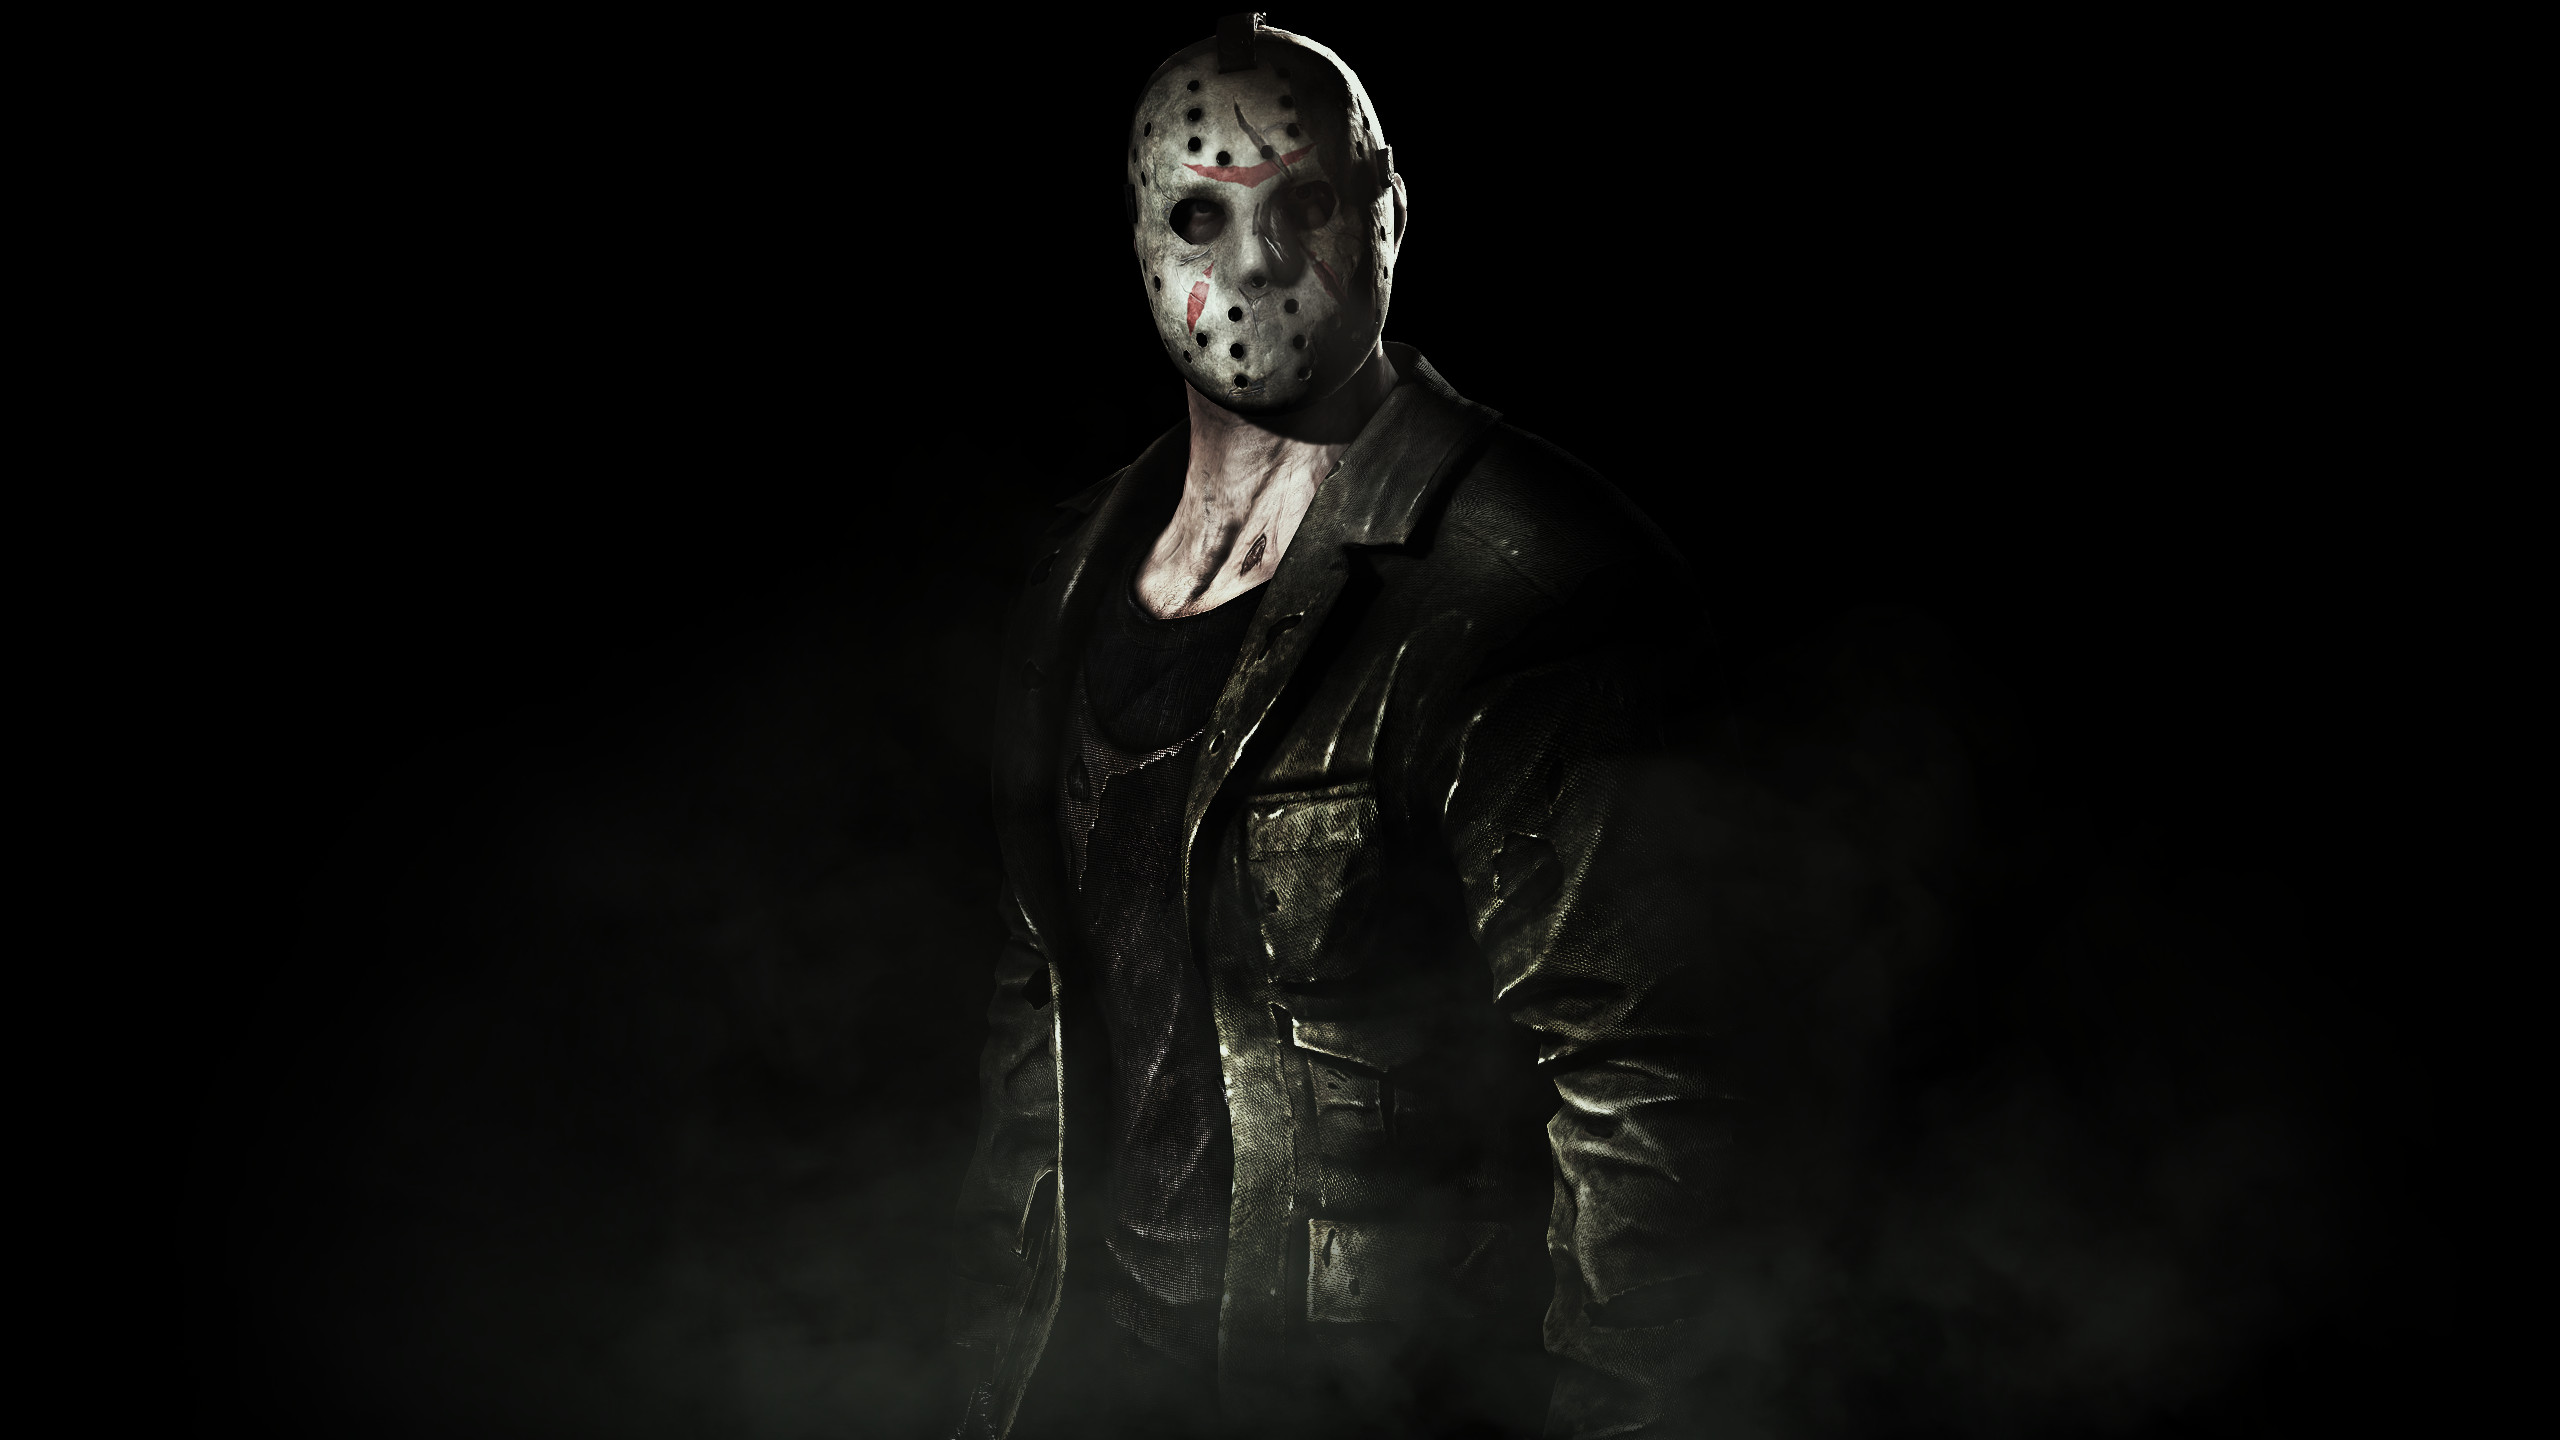 Release of Mortal Kombat Xs first chunk of DLC including playable character Jason Voorhees, or maybe Jason Voorhees will you first. The Friday the 13th